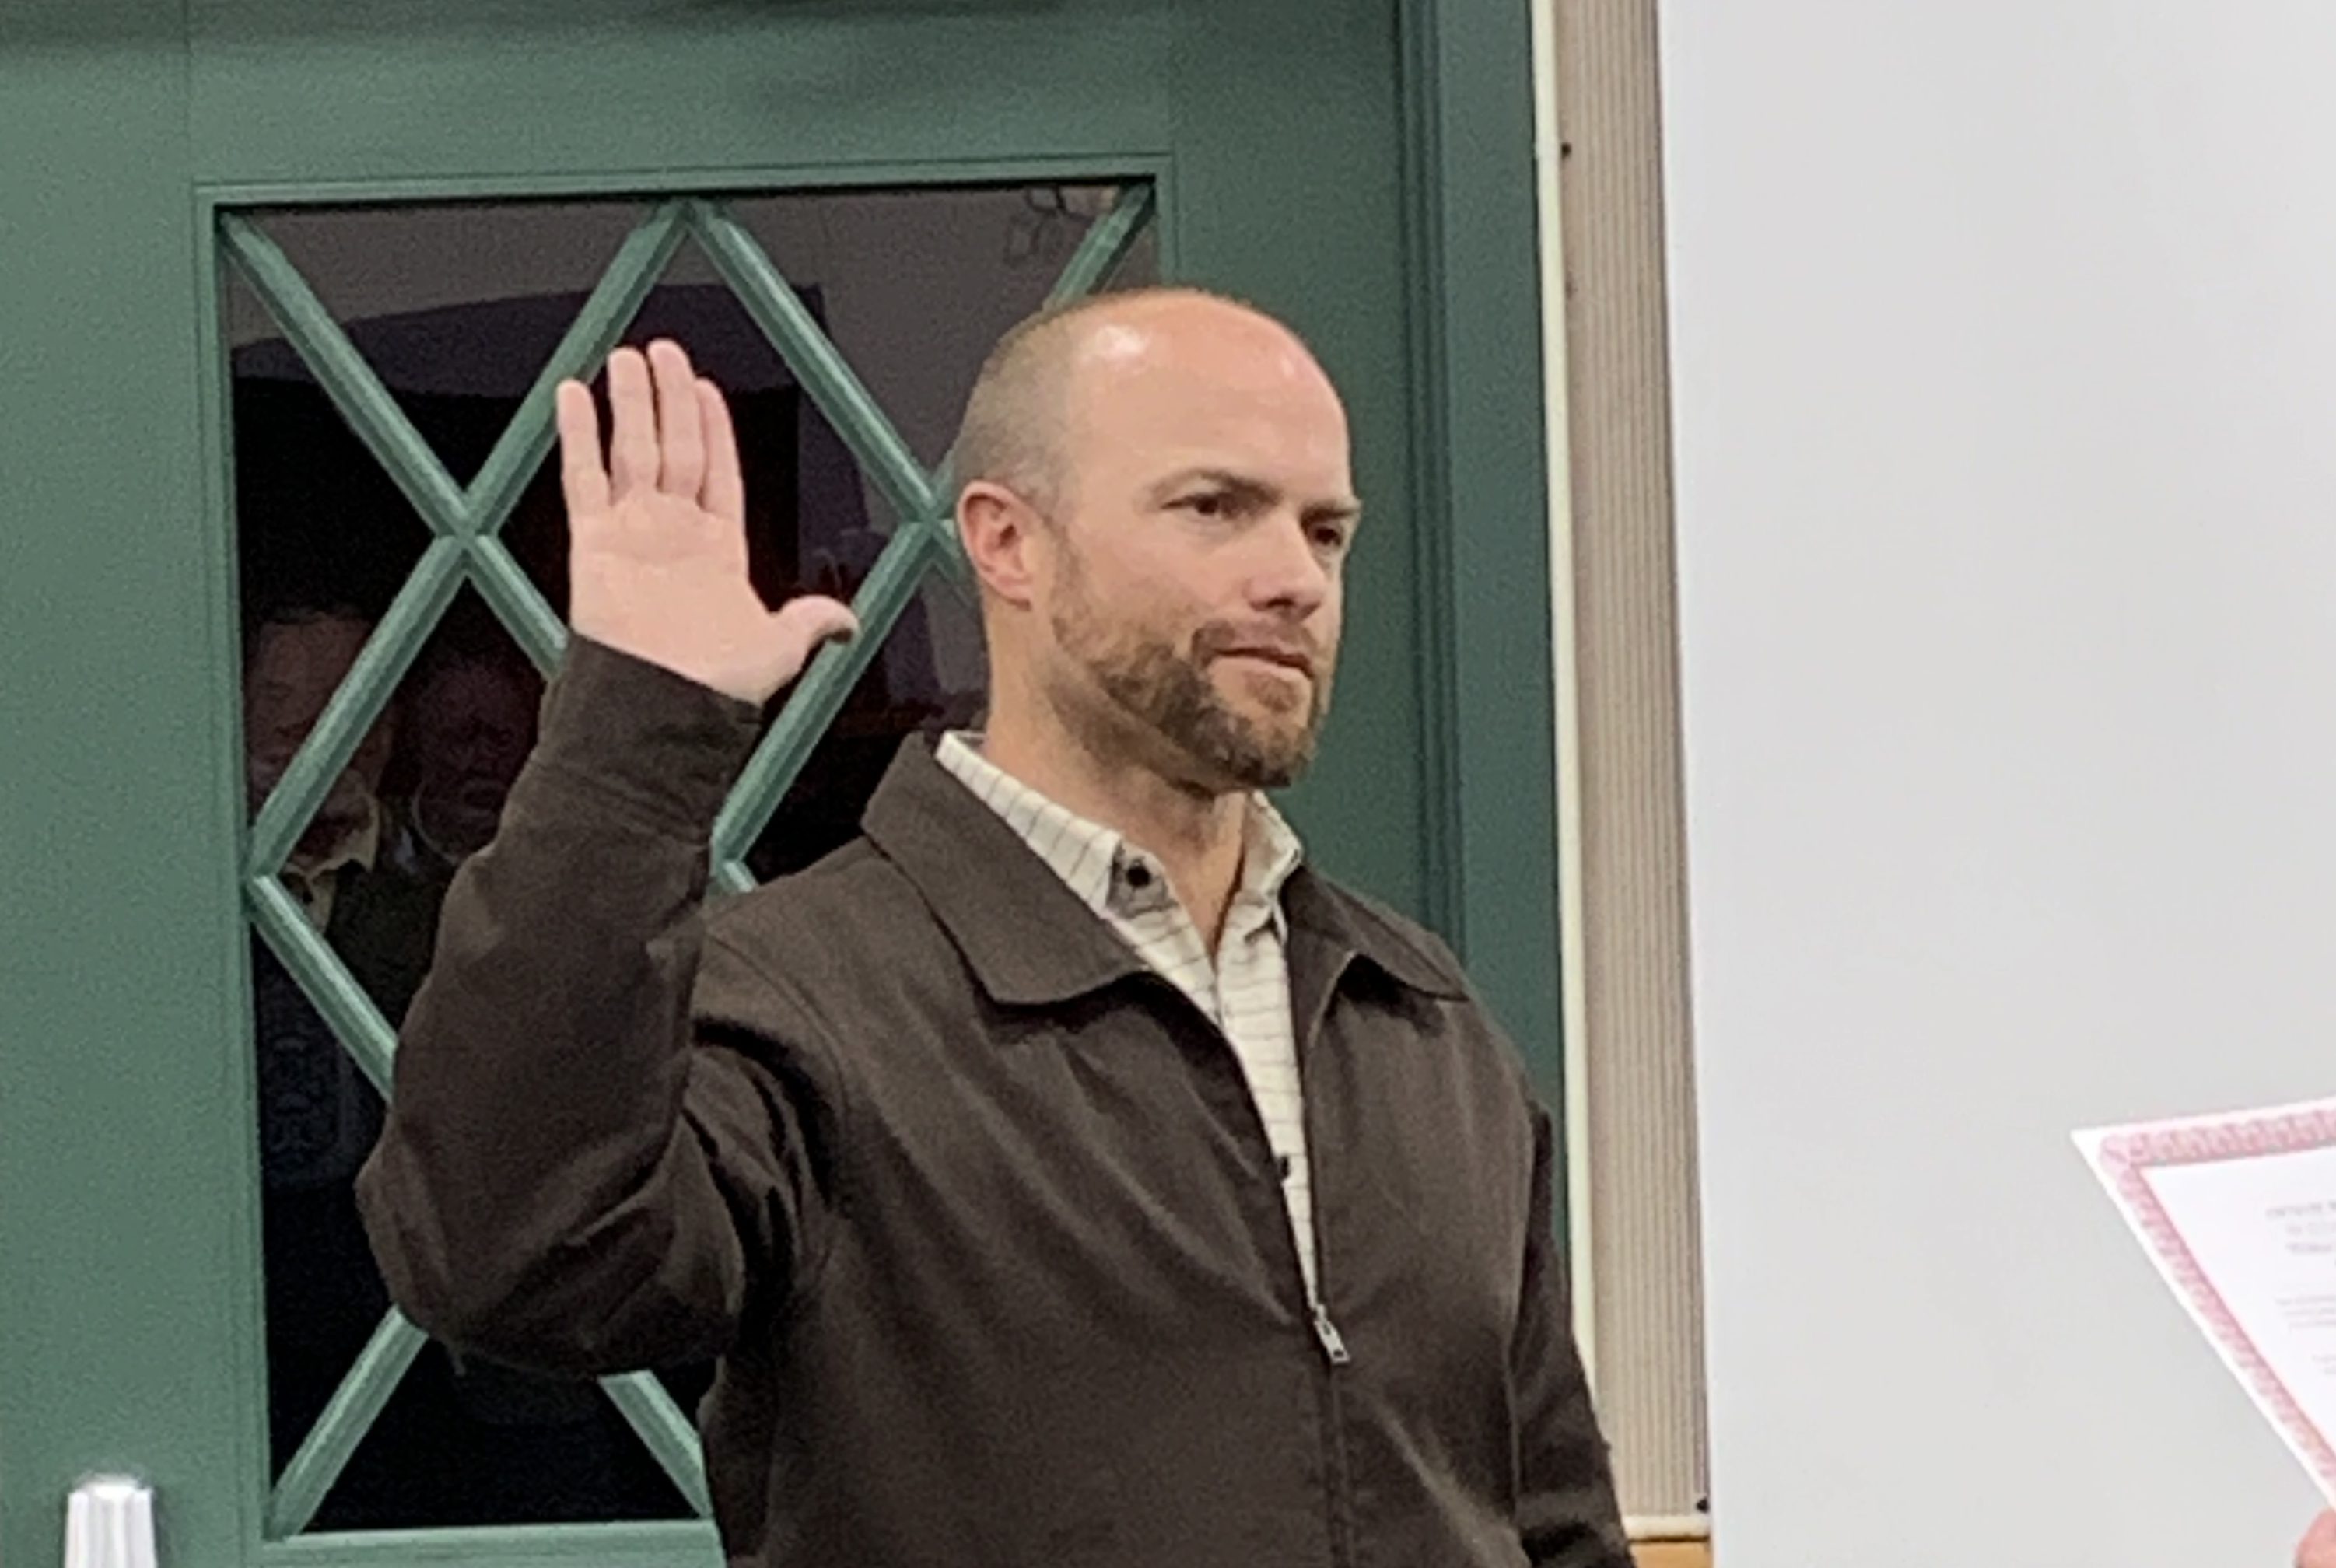 Solvang City Council appoints Daniel Johnson to vacant council seat